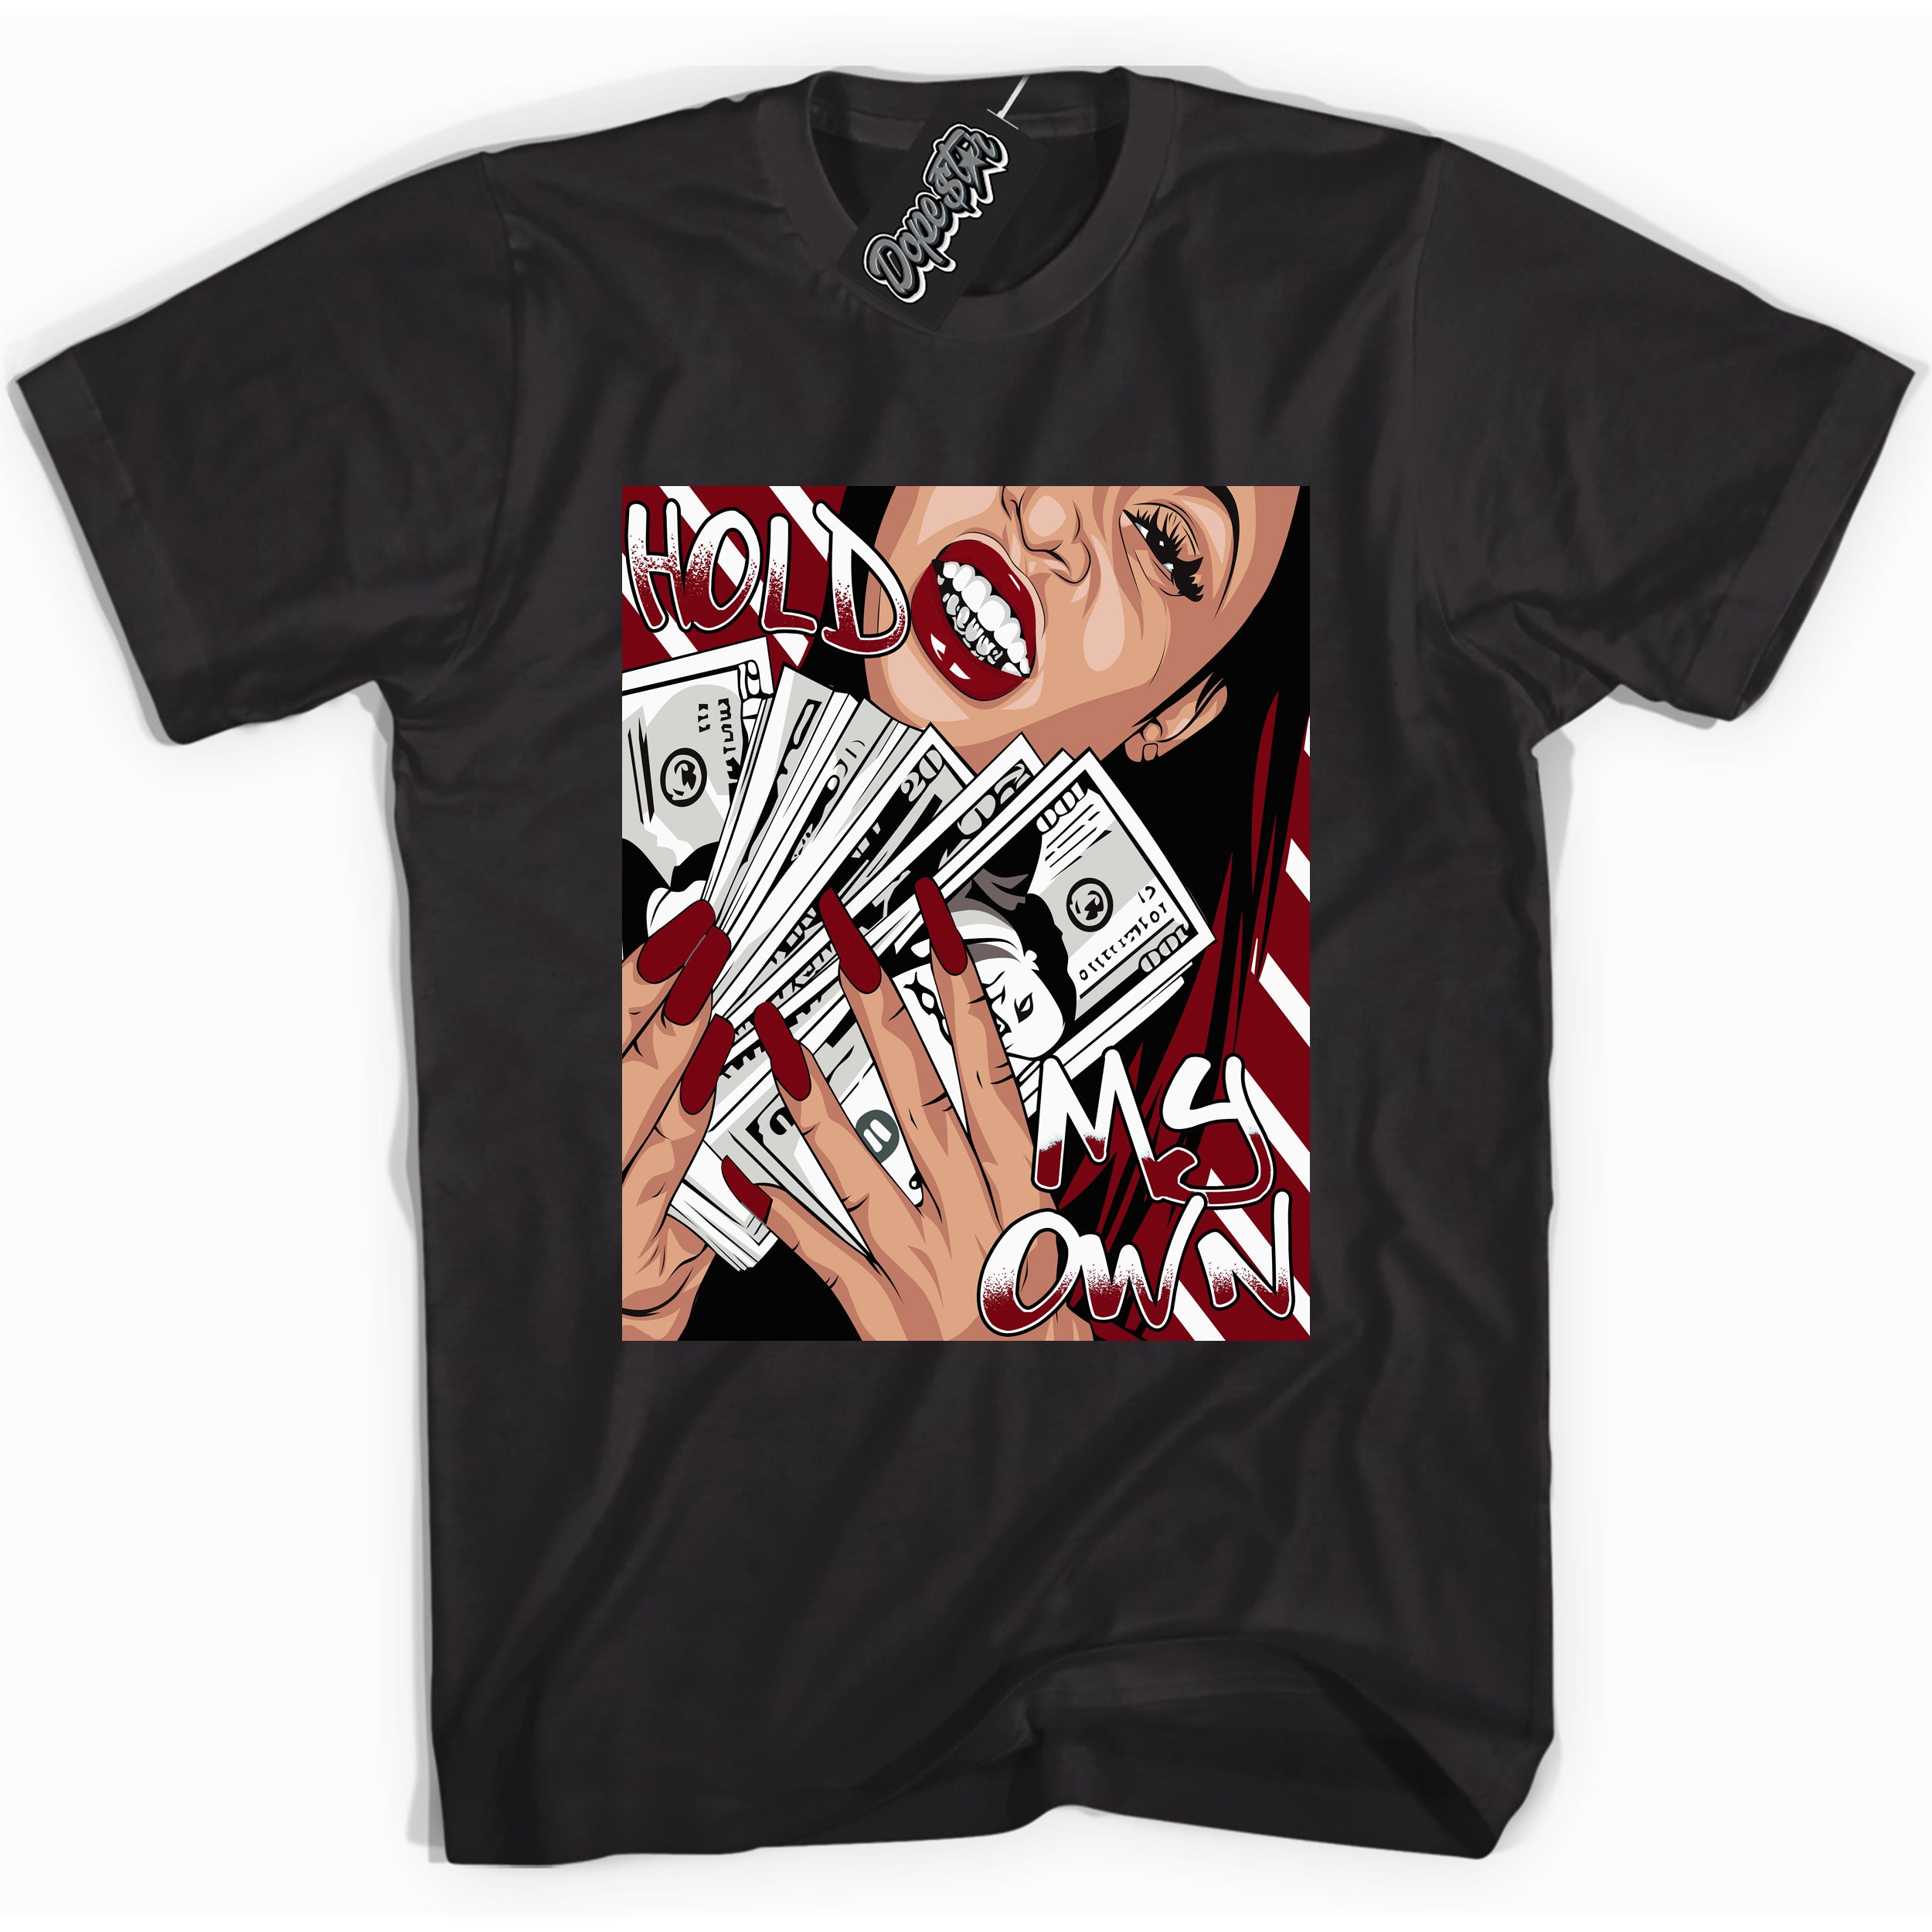 Cool Black graphic tee with “ Hold My Own ” print, that perfectly matches OG Metallic Burgundy 1s sneakers 